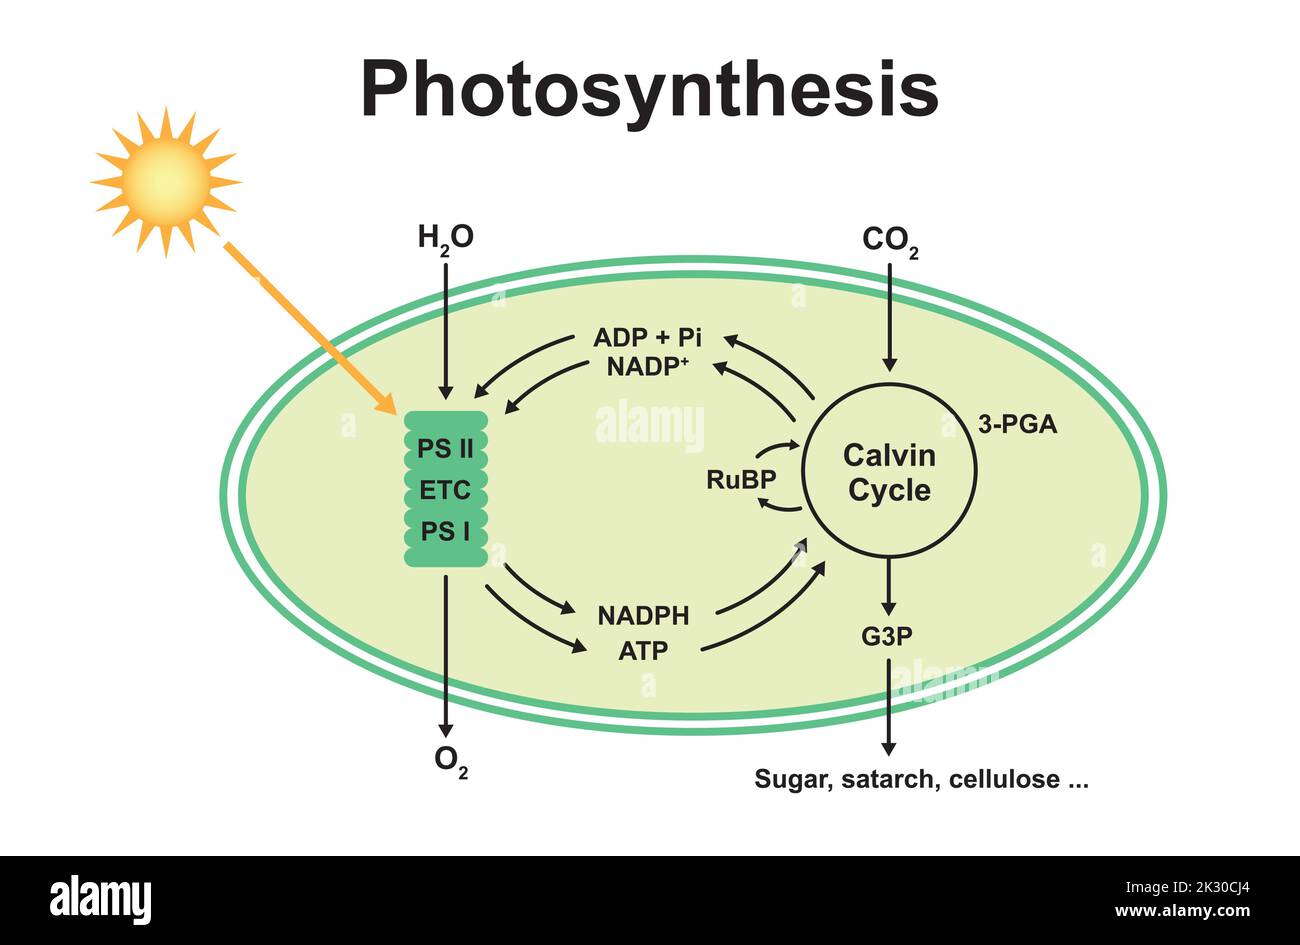 Scientific Designing of Photosynthesis Process. Colorful Symbols. Vector Illustration. Stock Vector